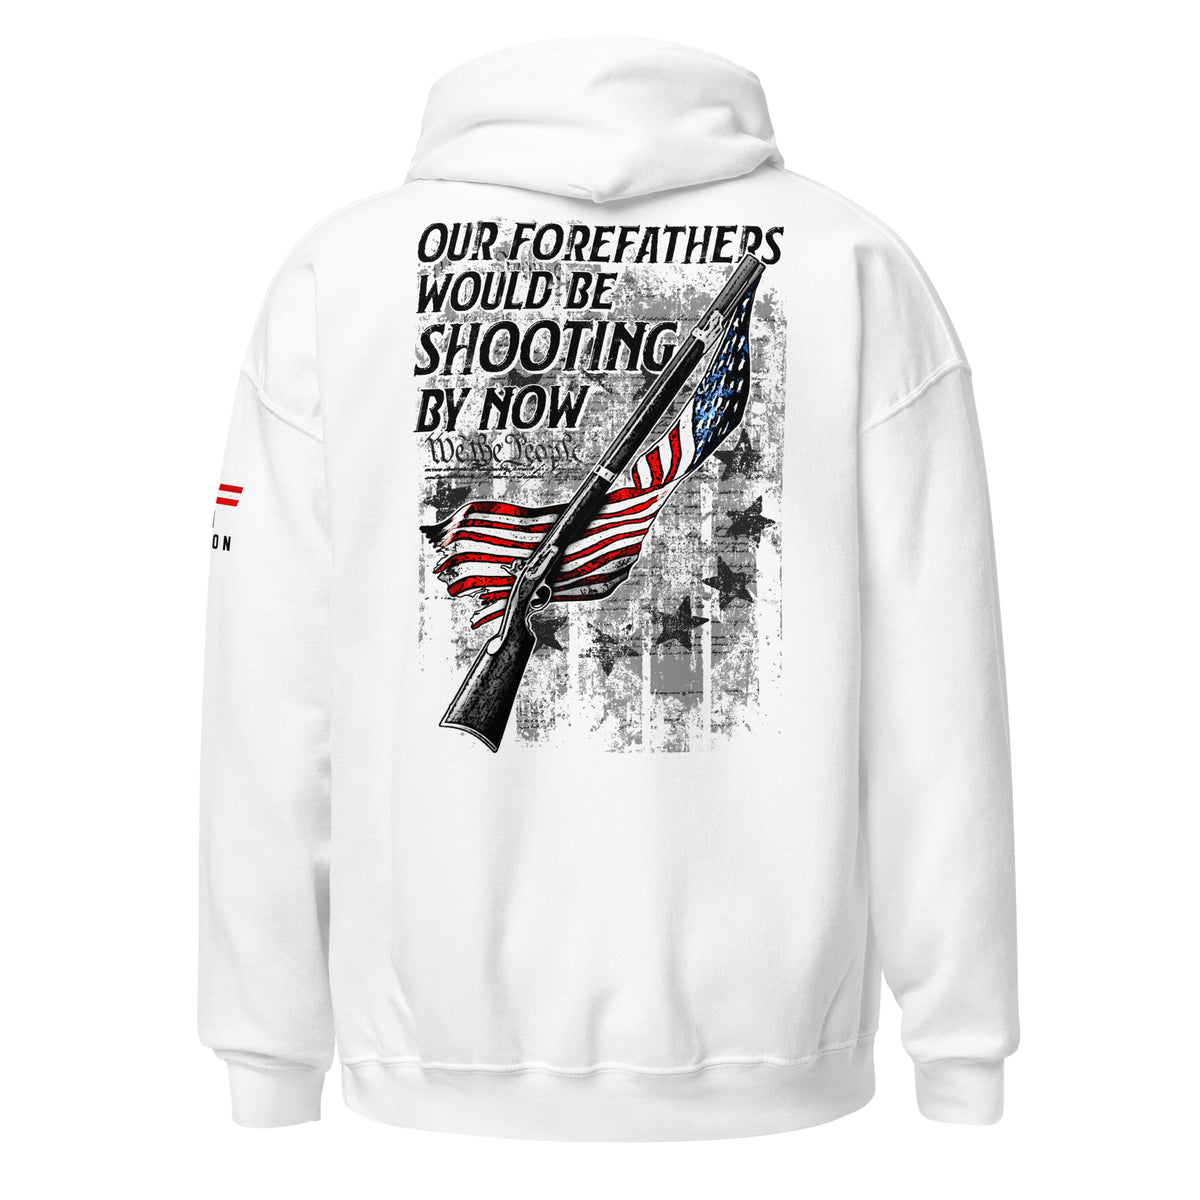 Forefathers Would Be Shooting: Light Hoodie